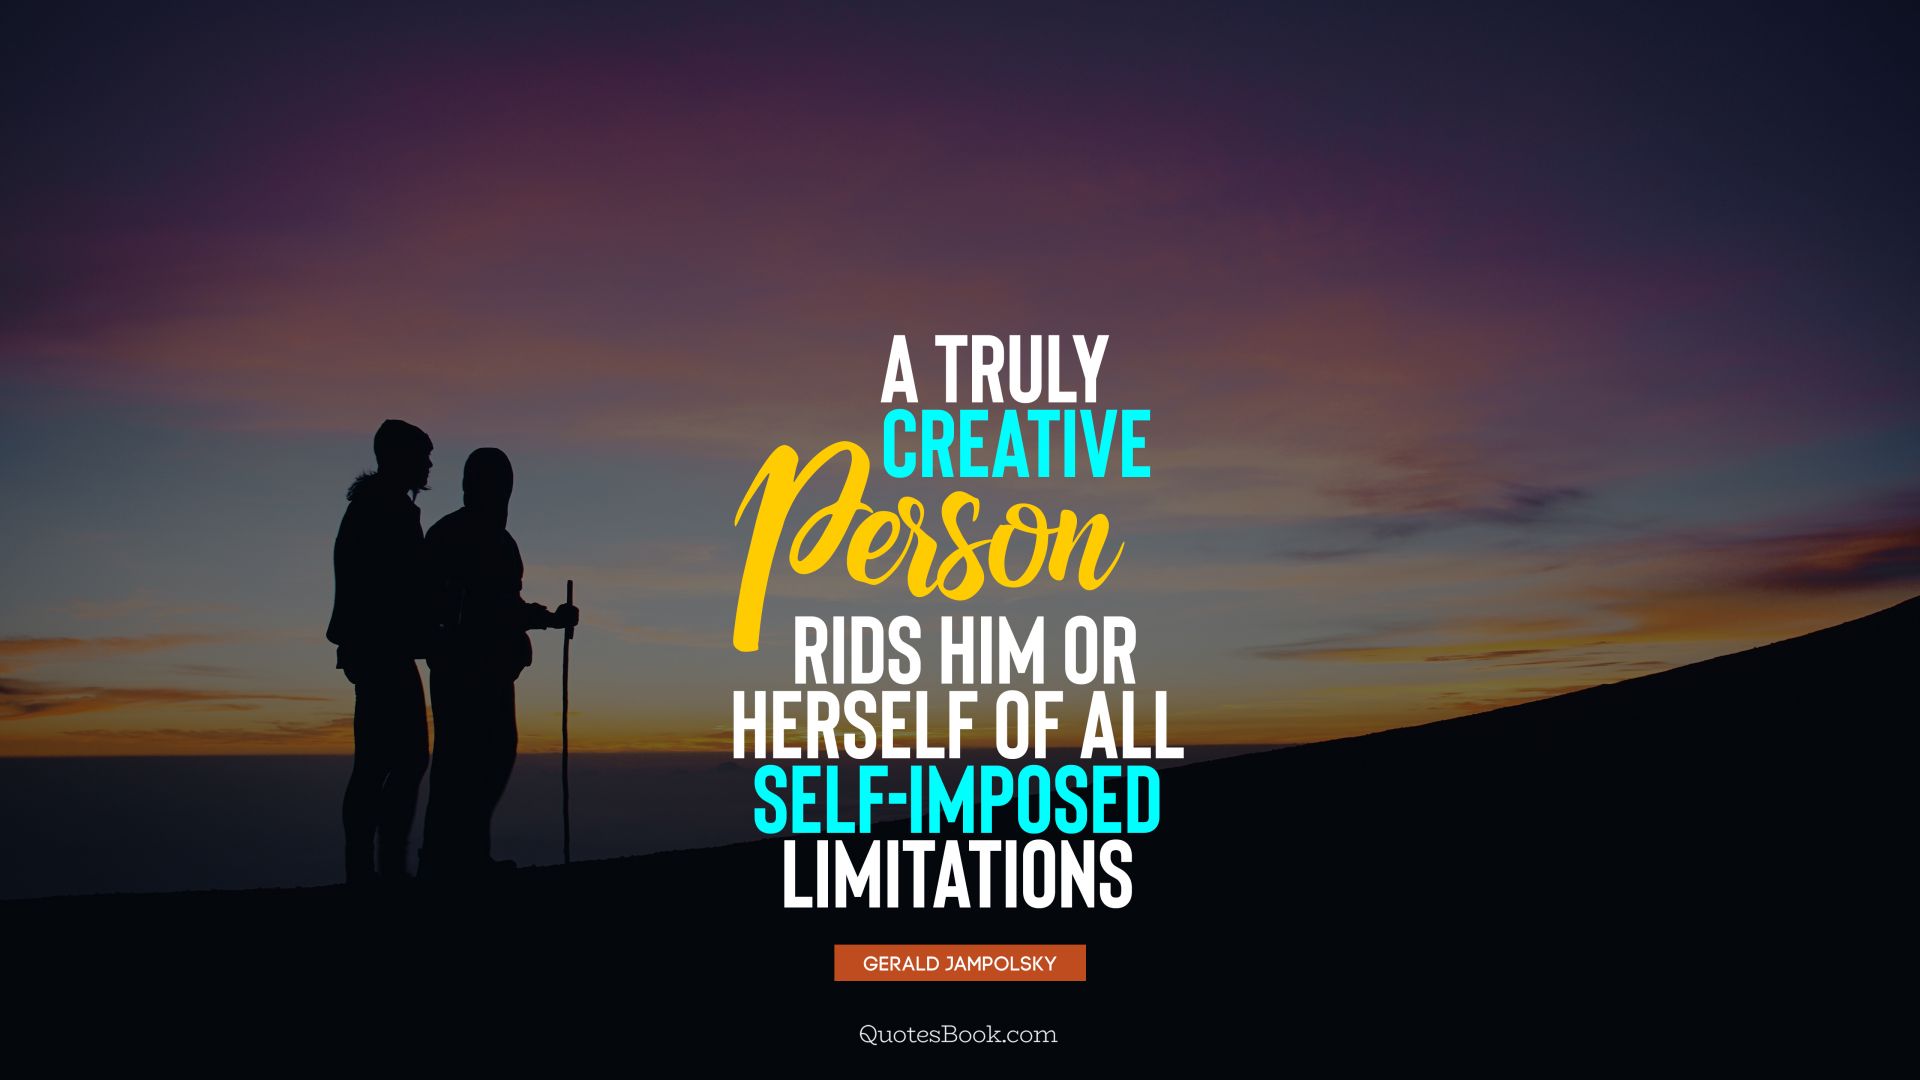 A truly creative person rids him or herself of all self-imposed limitations. - Quote by Gerald Jampolsky